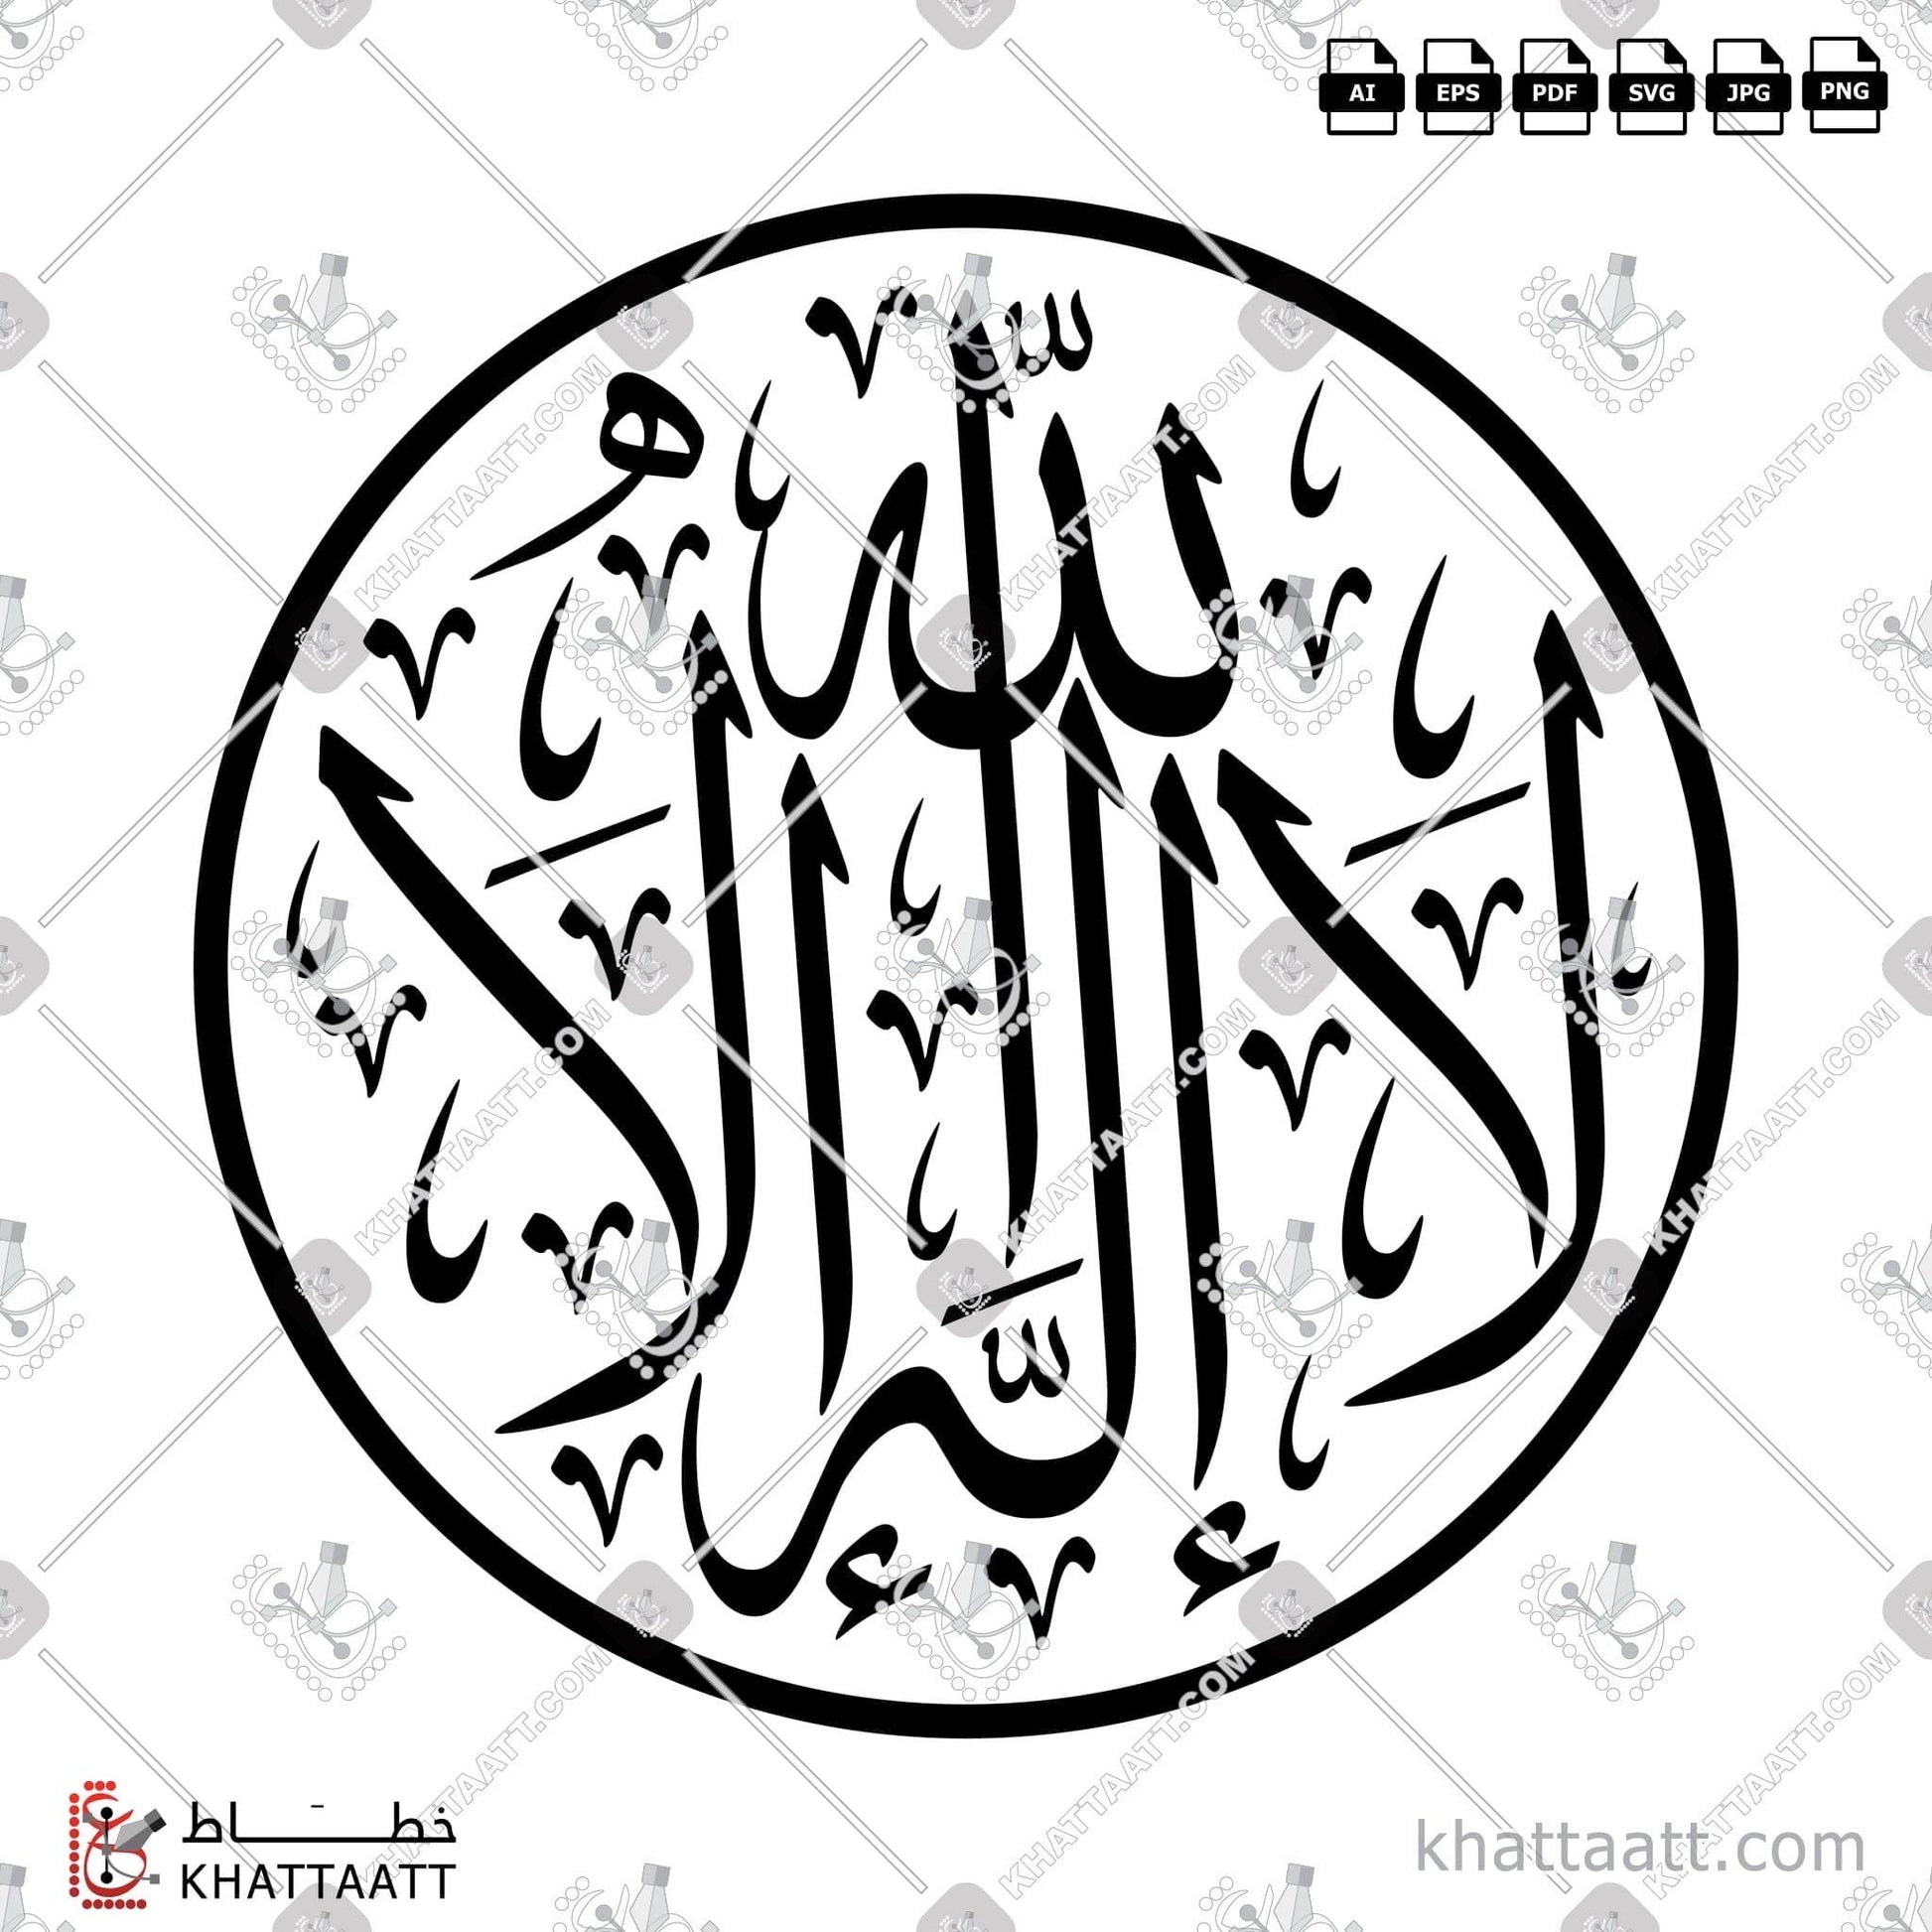 Download Arabic Calligraphy of لا إله إلا الله in Thuluth - خط الثلث in vector and .png